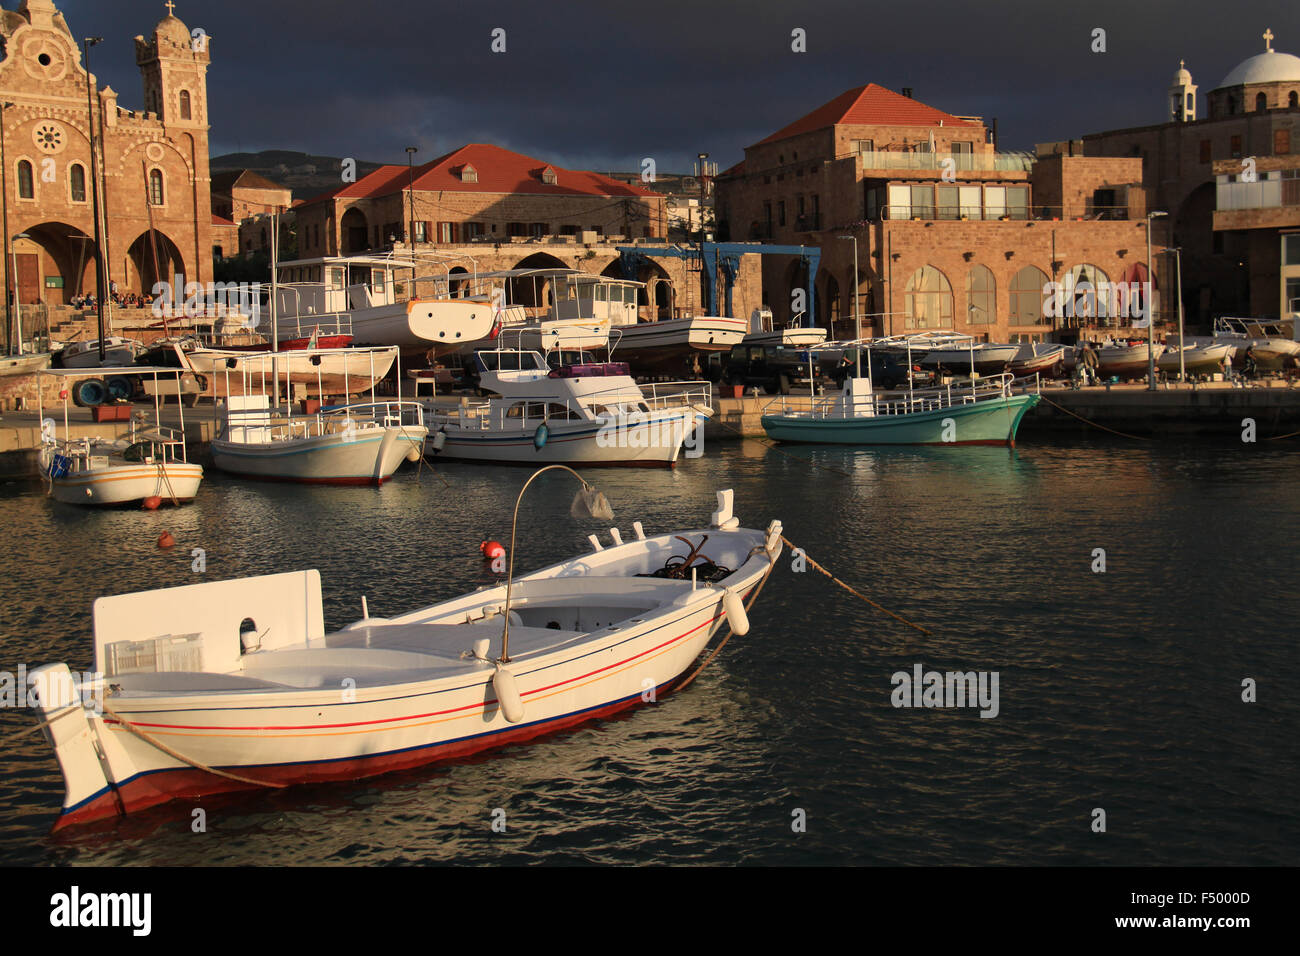 A view of the Batroun's fishing port, a Lebanese coastal town, in the afternoon. Stock Photo